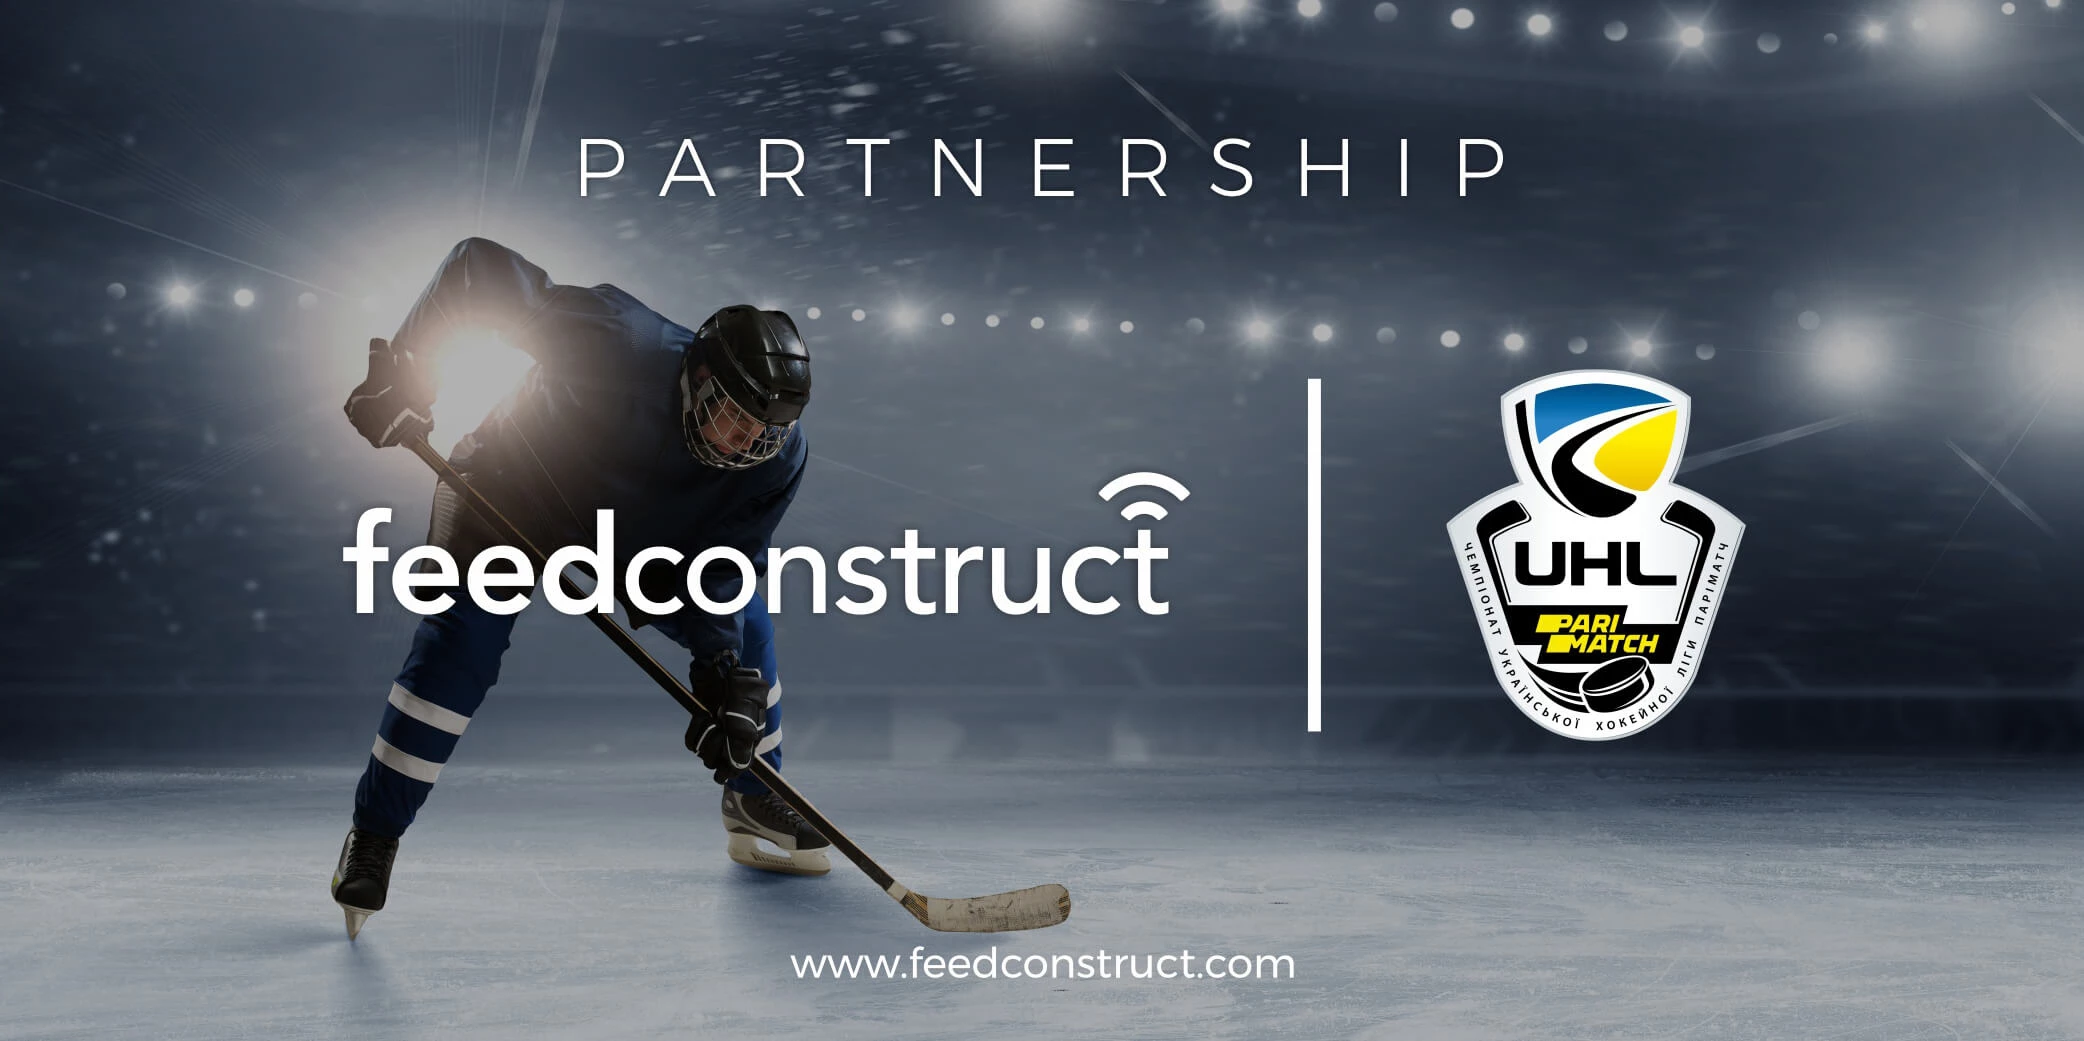 FeedConstruct signs exclusive deal with the Ukrainian Hockey League